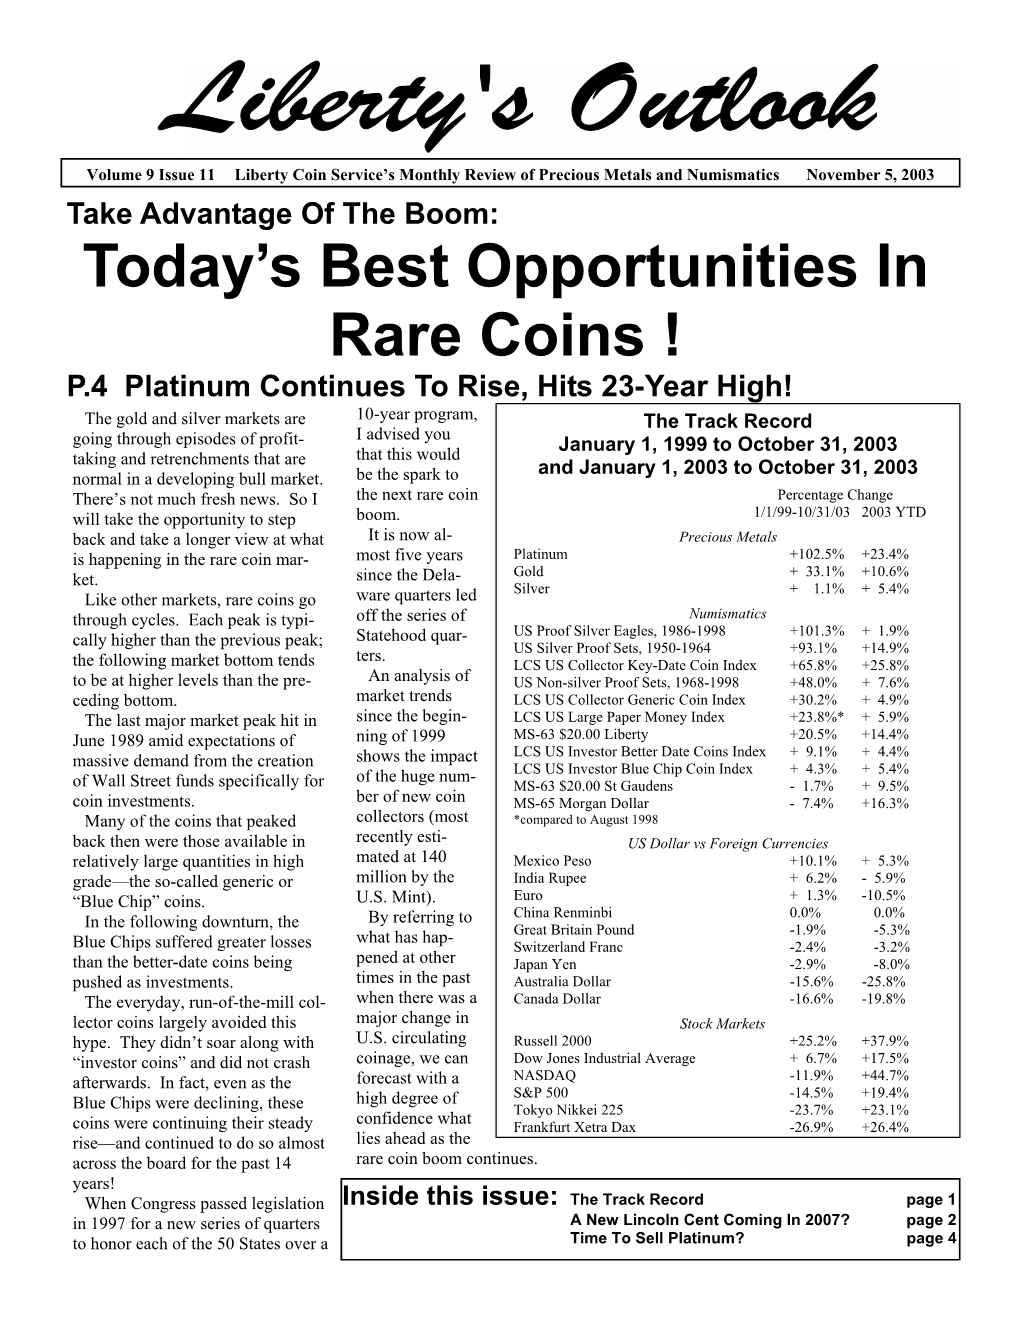 Today's Best Opportunities in Rare Coins !